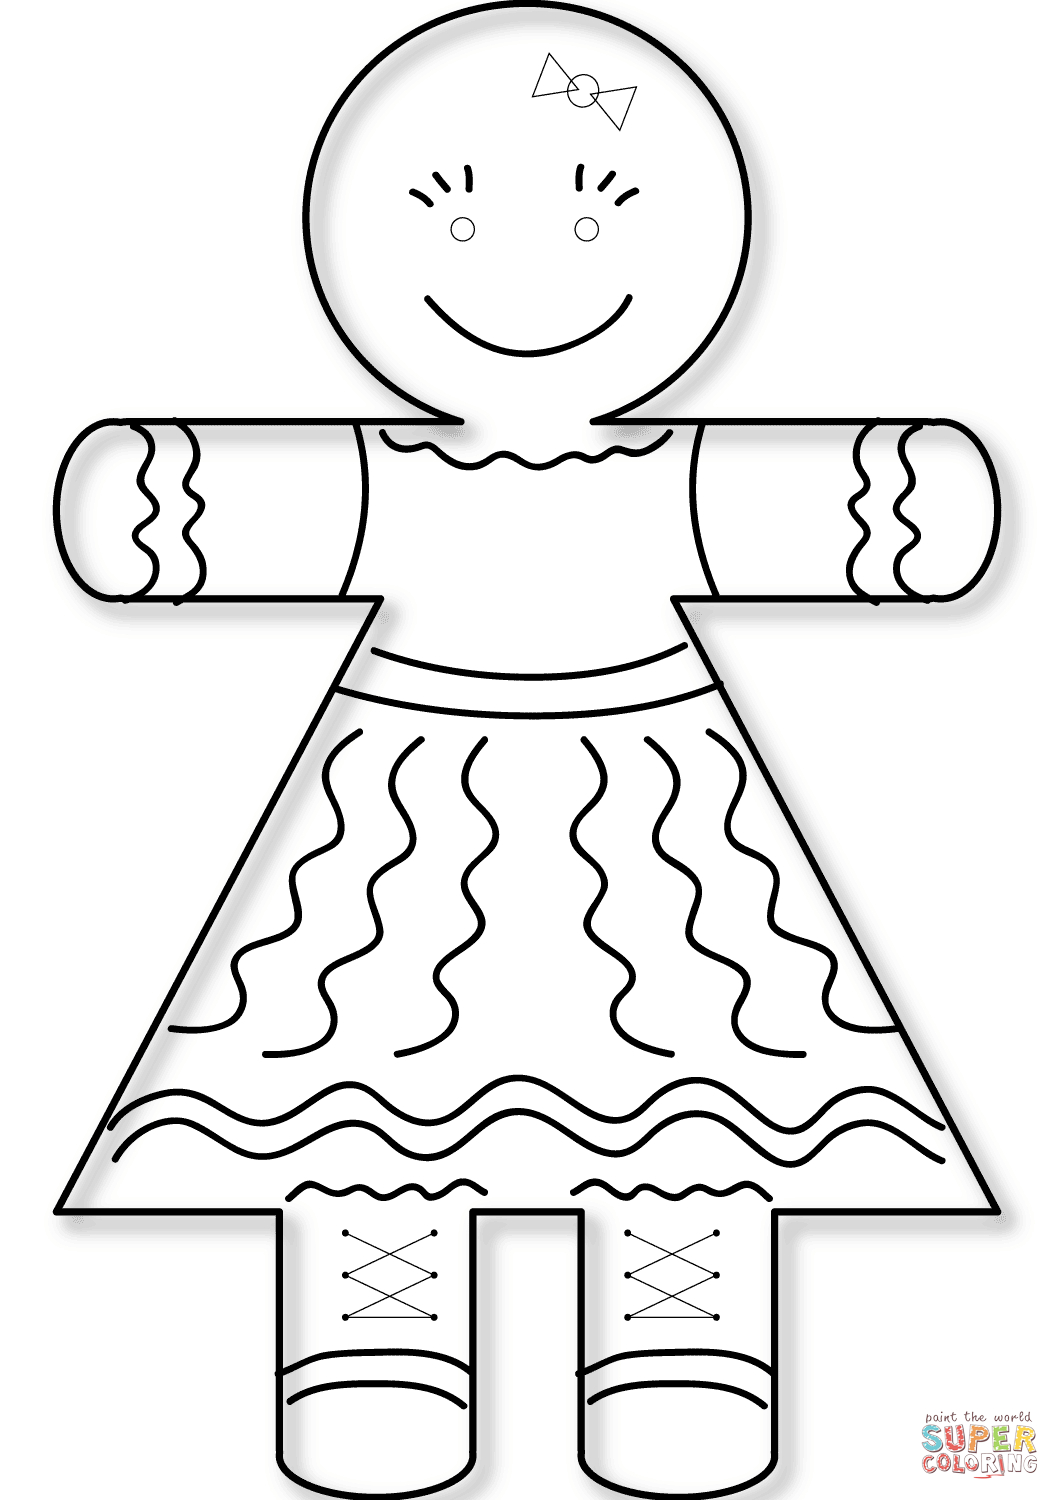 Gingerbread Girl Coloring Page | Free Printable Coloring Pages - Gingerbread Template Free Printable